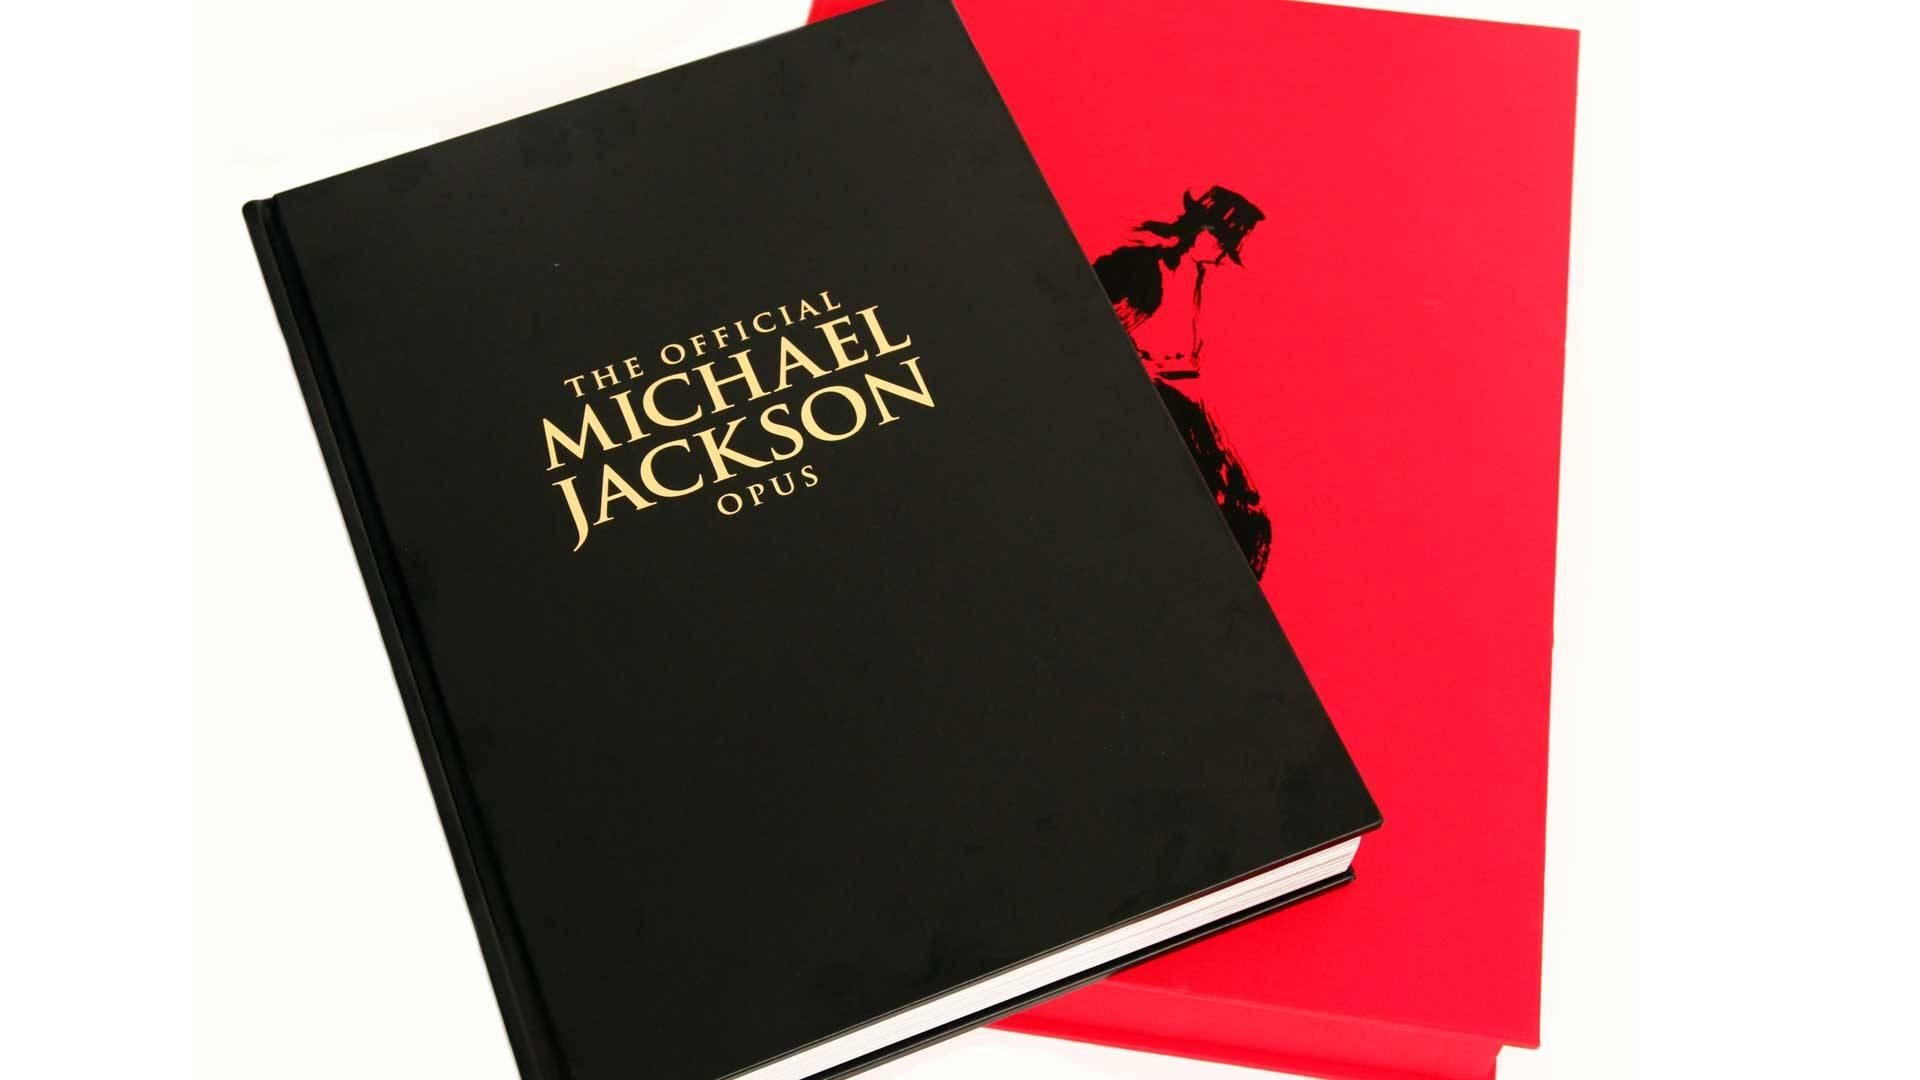 how much is the michael jackson opus worth